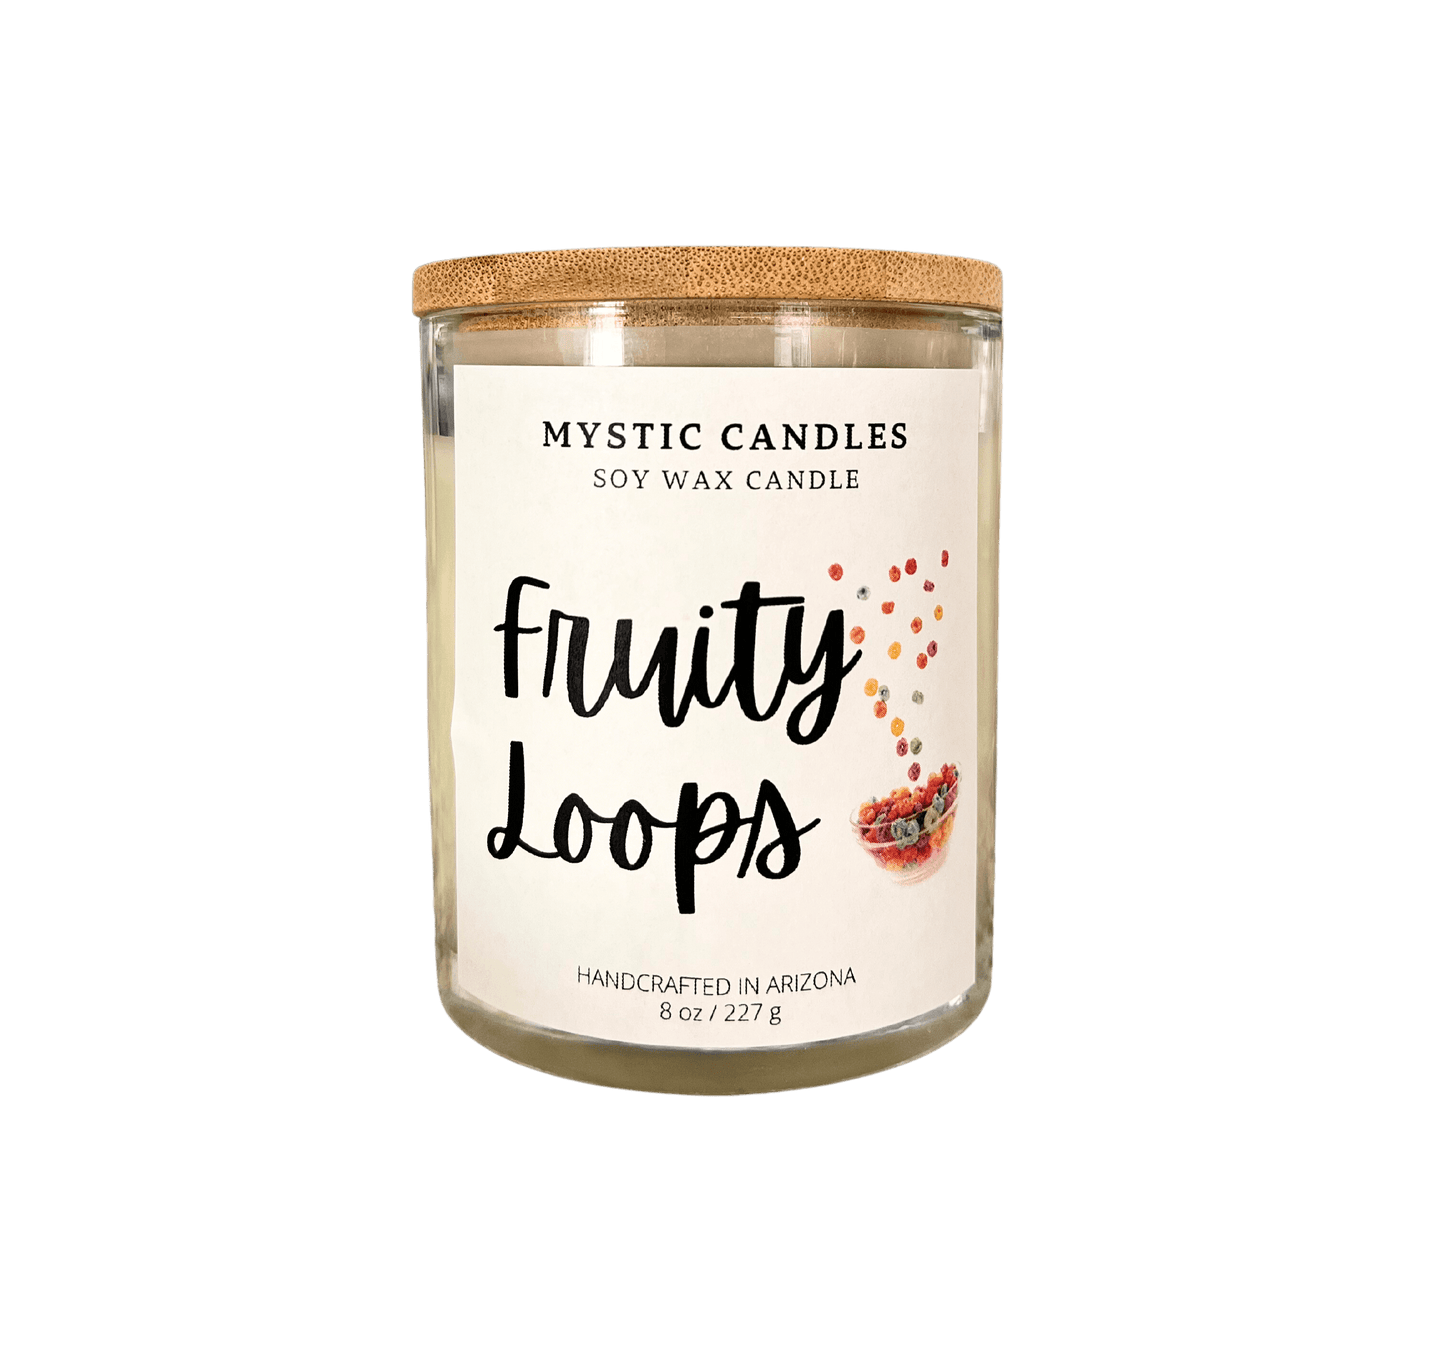 Fruity Loops Candle - Mystic Candles